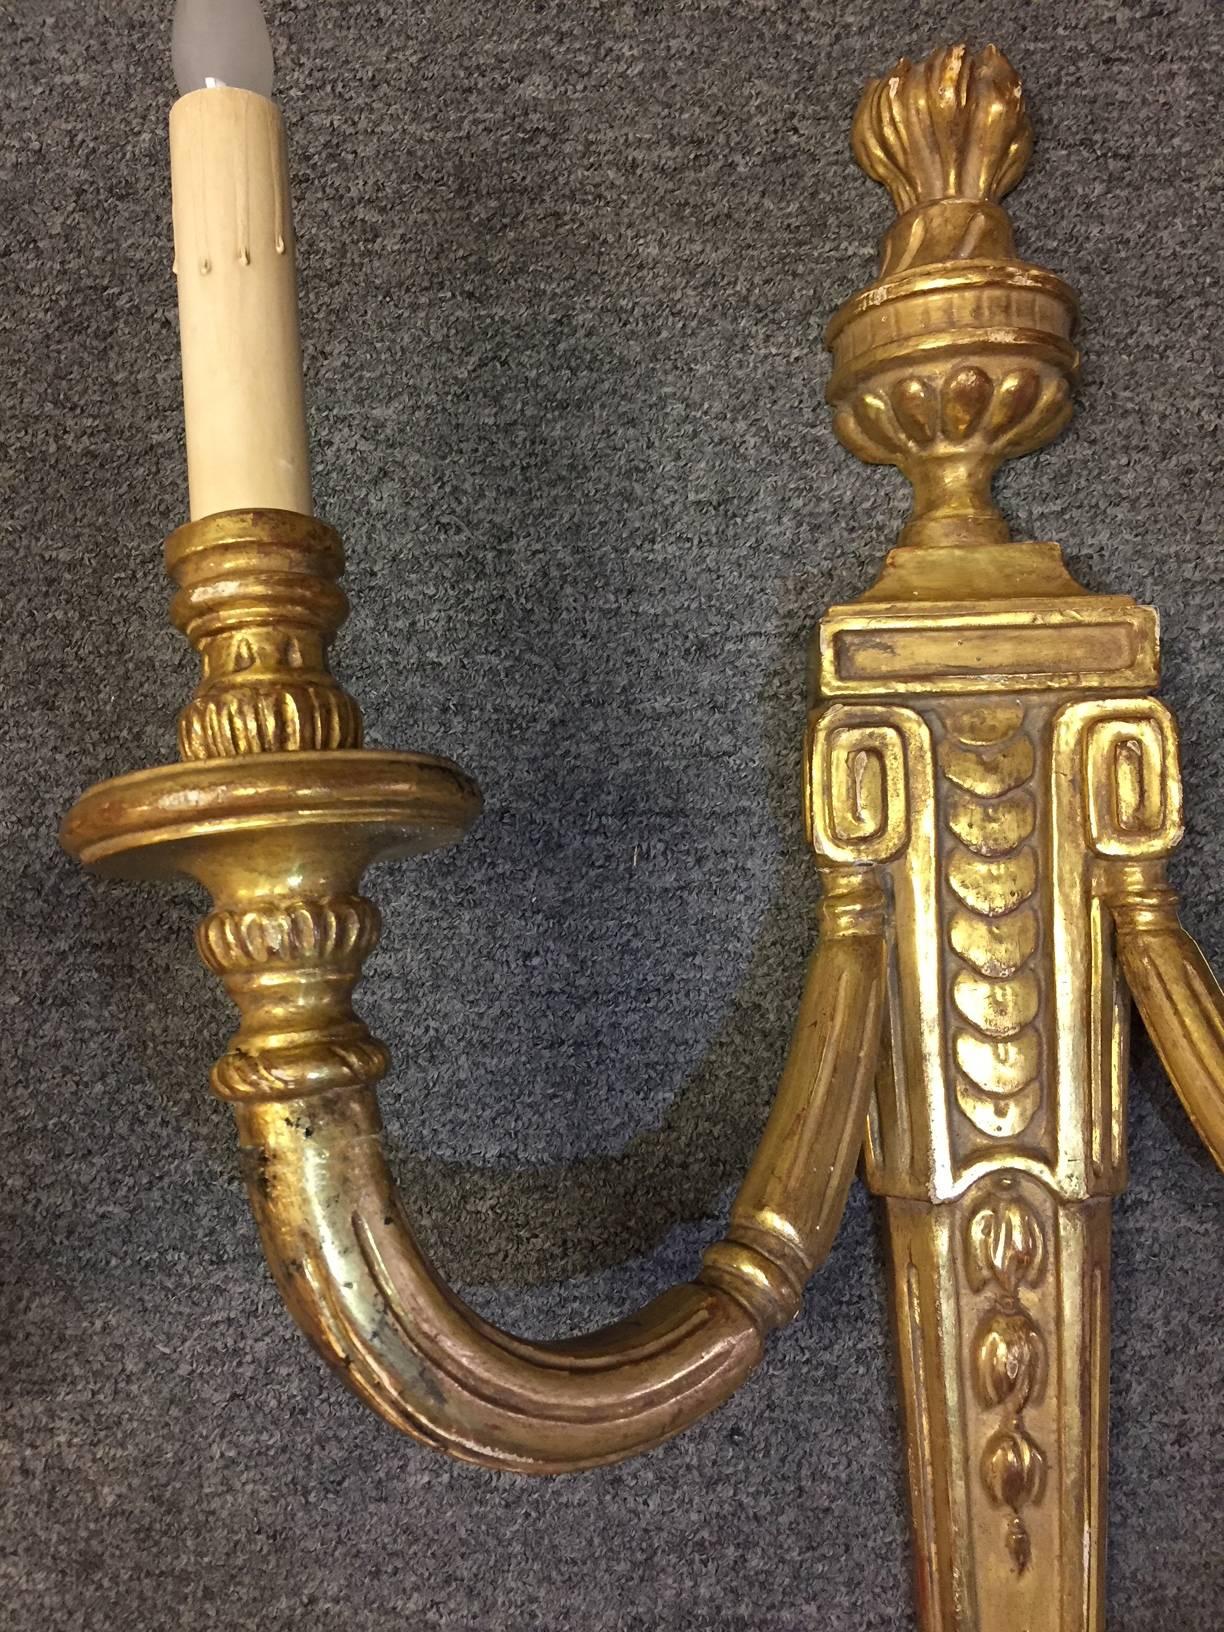 Large Pair of Italian Neoclassical Style Giltwood Sconces In Good Condition For Sale In Cypress, CA